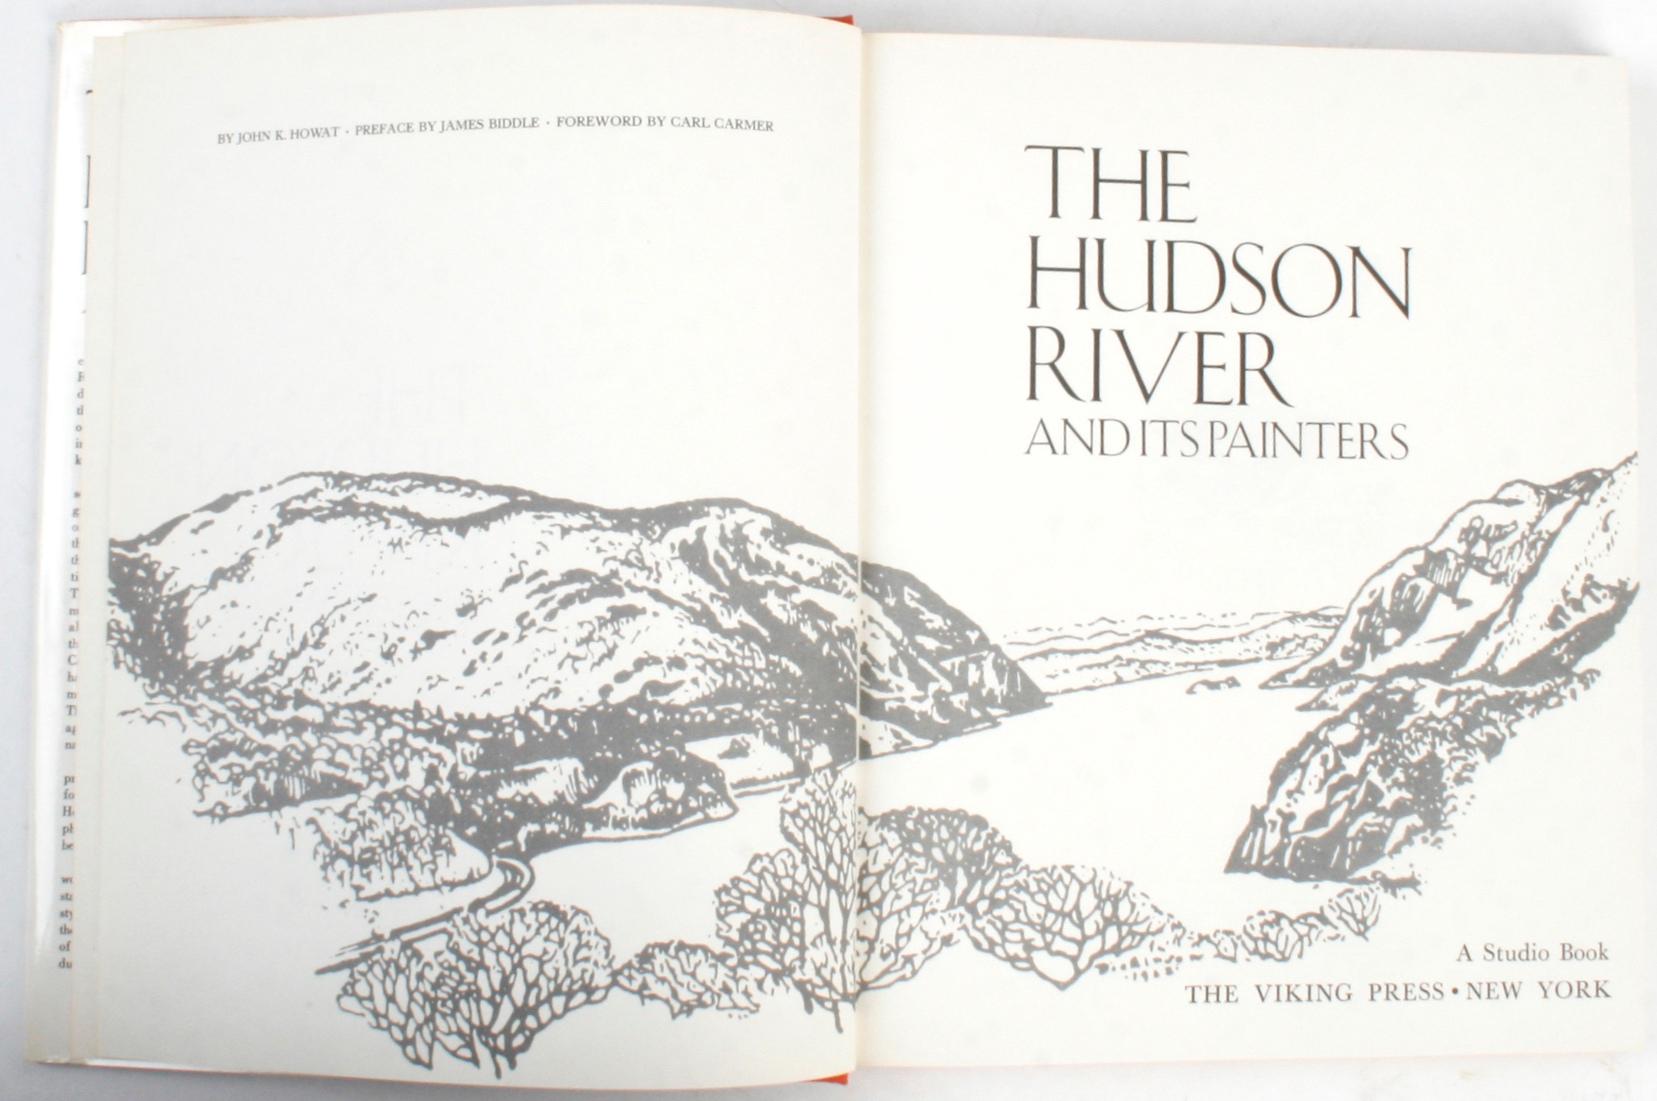 The Hudson River And Its Painters, first edition hardcover with dust jacket. Viking Press, New York, 1972. This book offers an opportunity to enjoy the work of the pioneering group of landscape painters in the last century, who were known as 